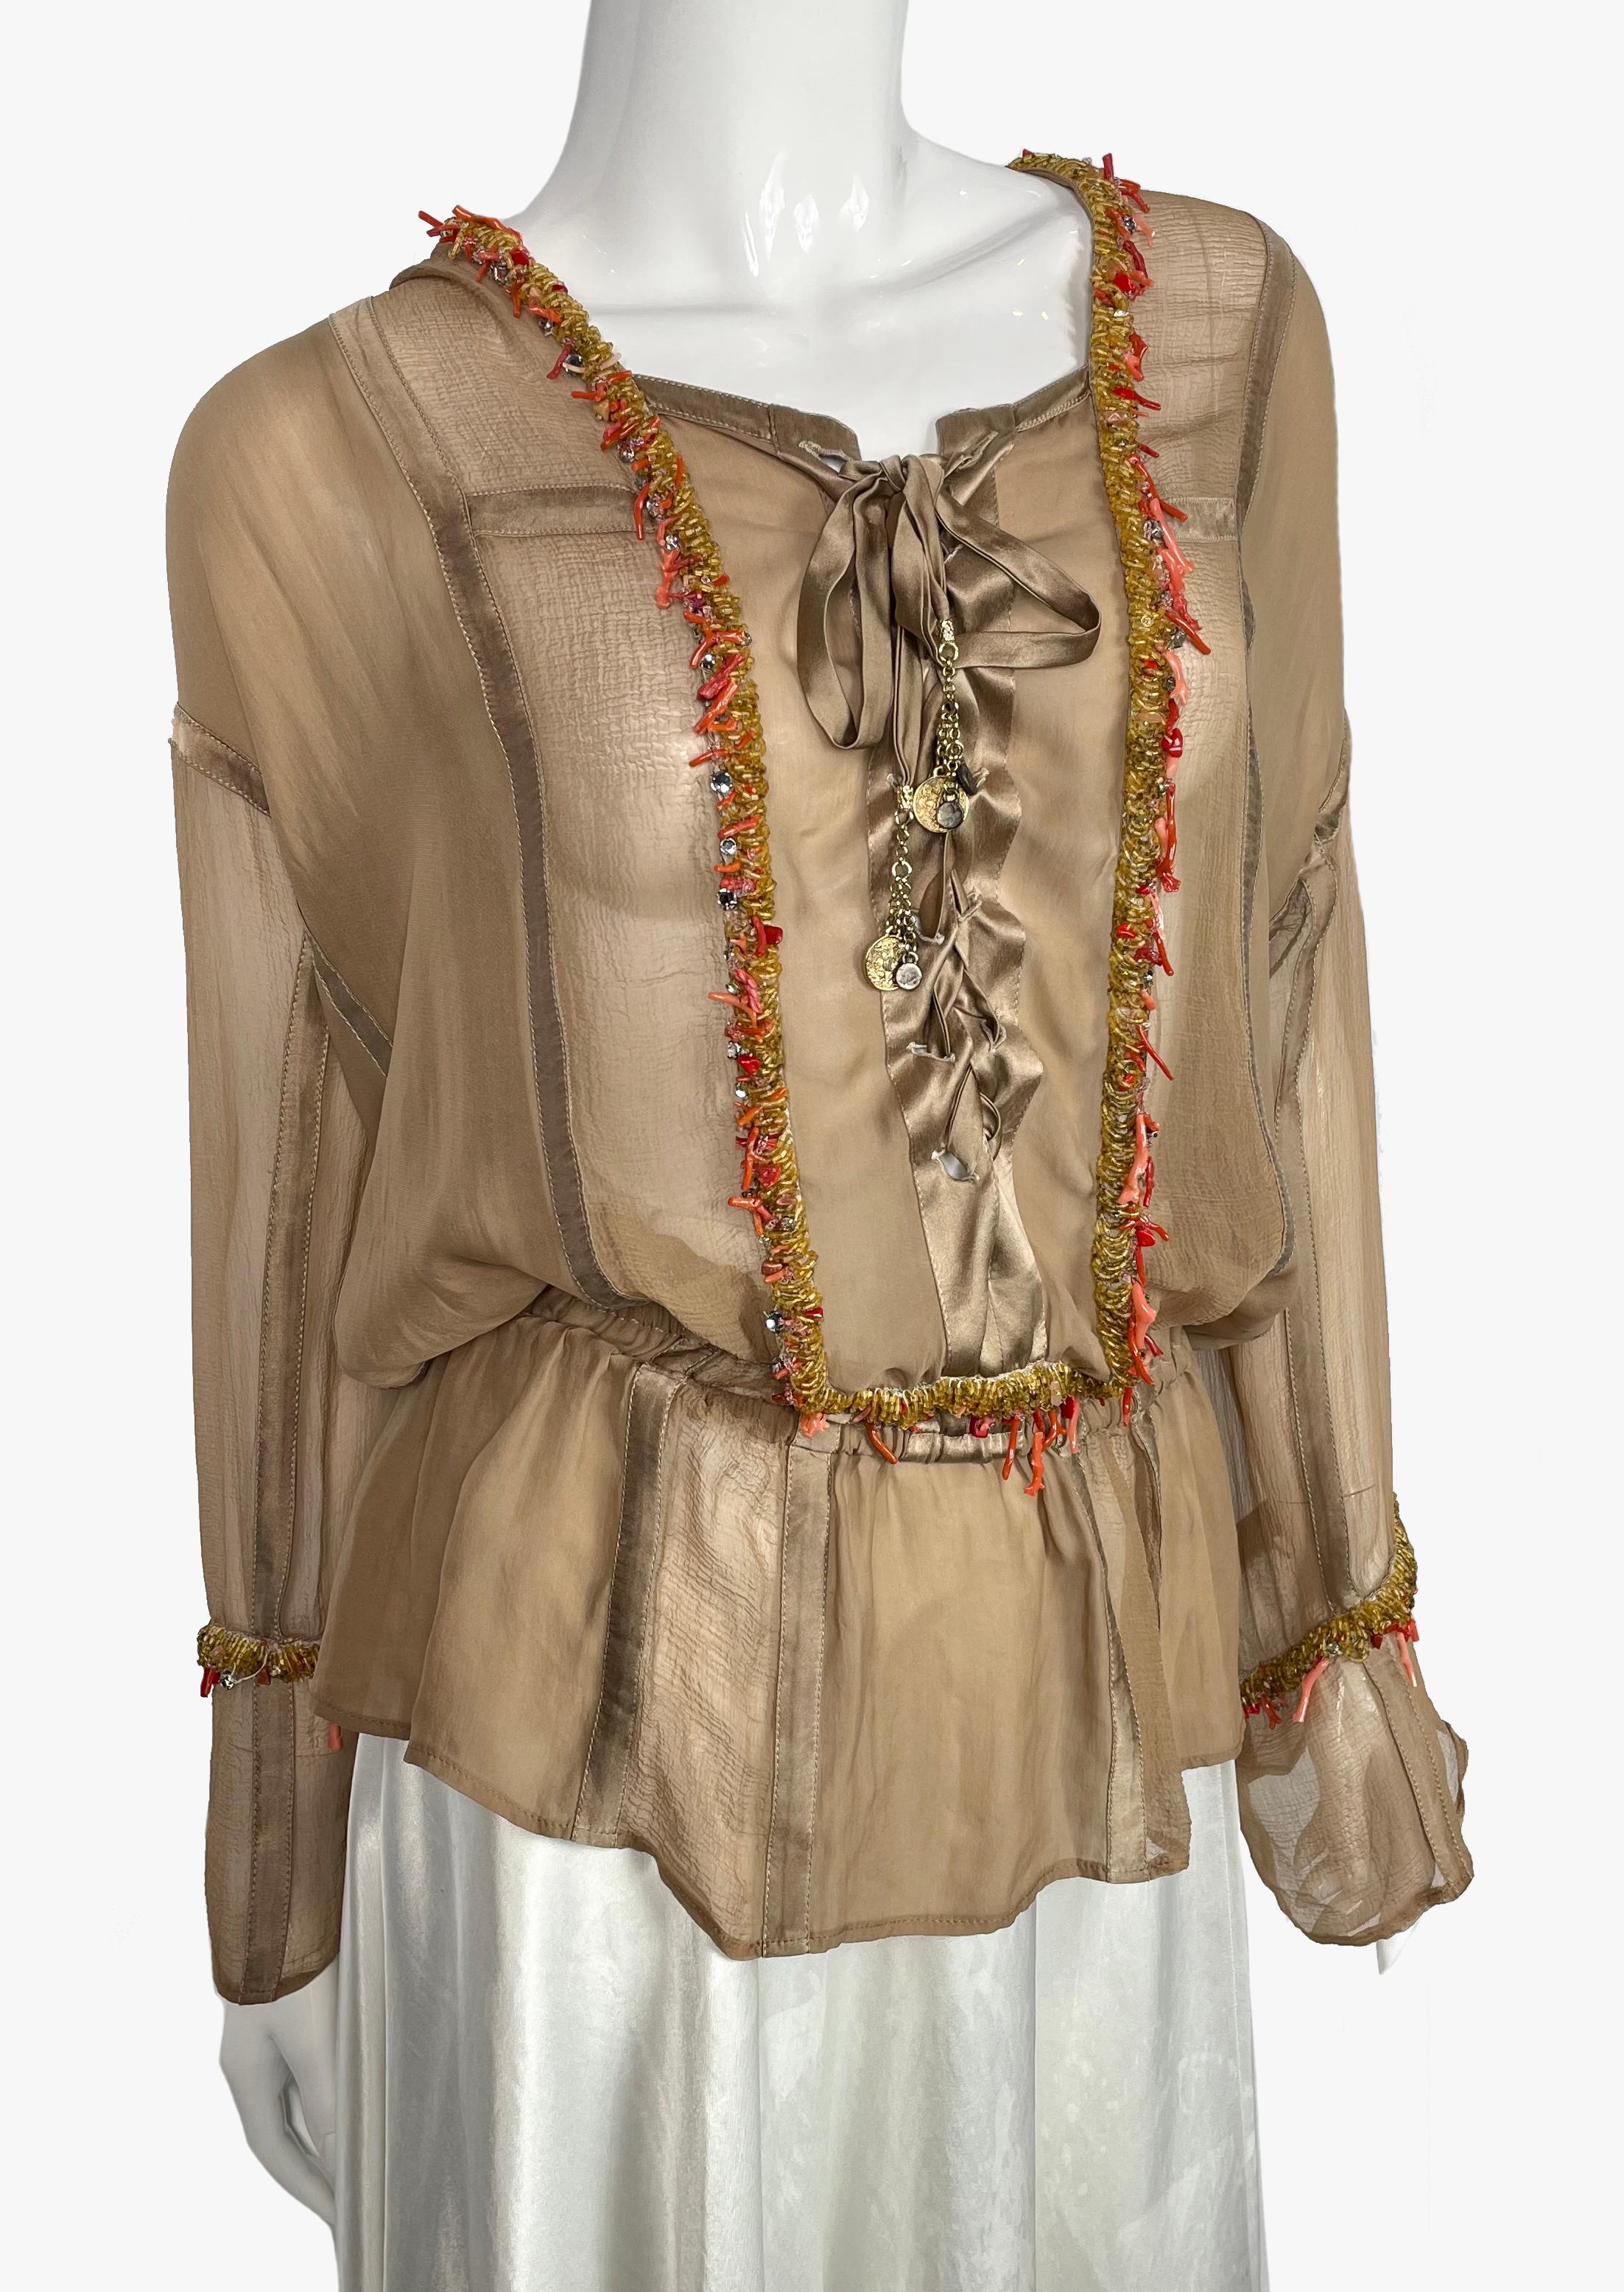 Silk blouse by Roberto Cavalli decorated with corals and beads. 
Tied at the chest with a silk ribbon. 
Elasticated waist.
Size: XS but will fit S-M
Total length - 71 cm / 28''
Sleeve - 71 cm / 28''
Waist - 70 cm / 27,5''
Composition: 100%